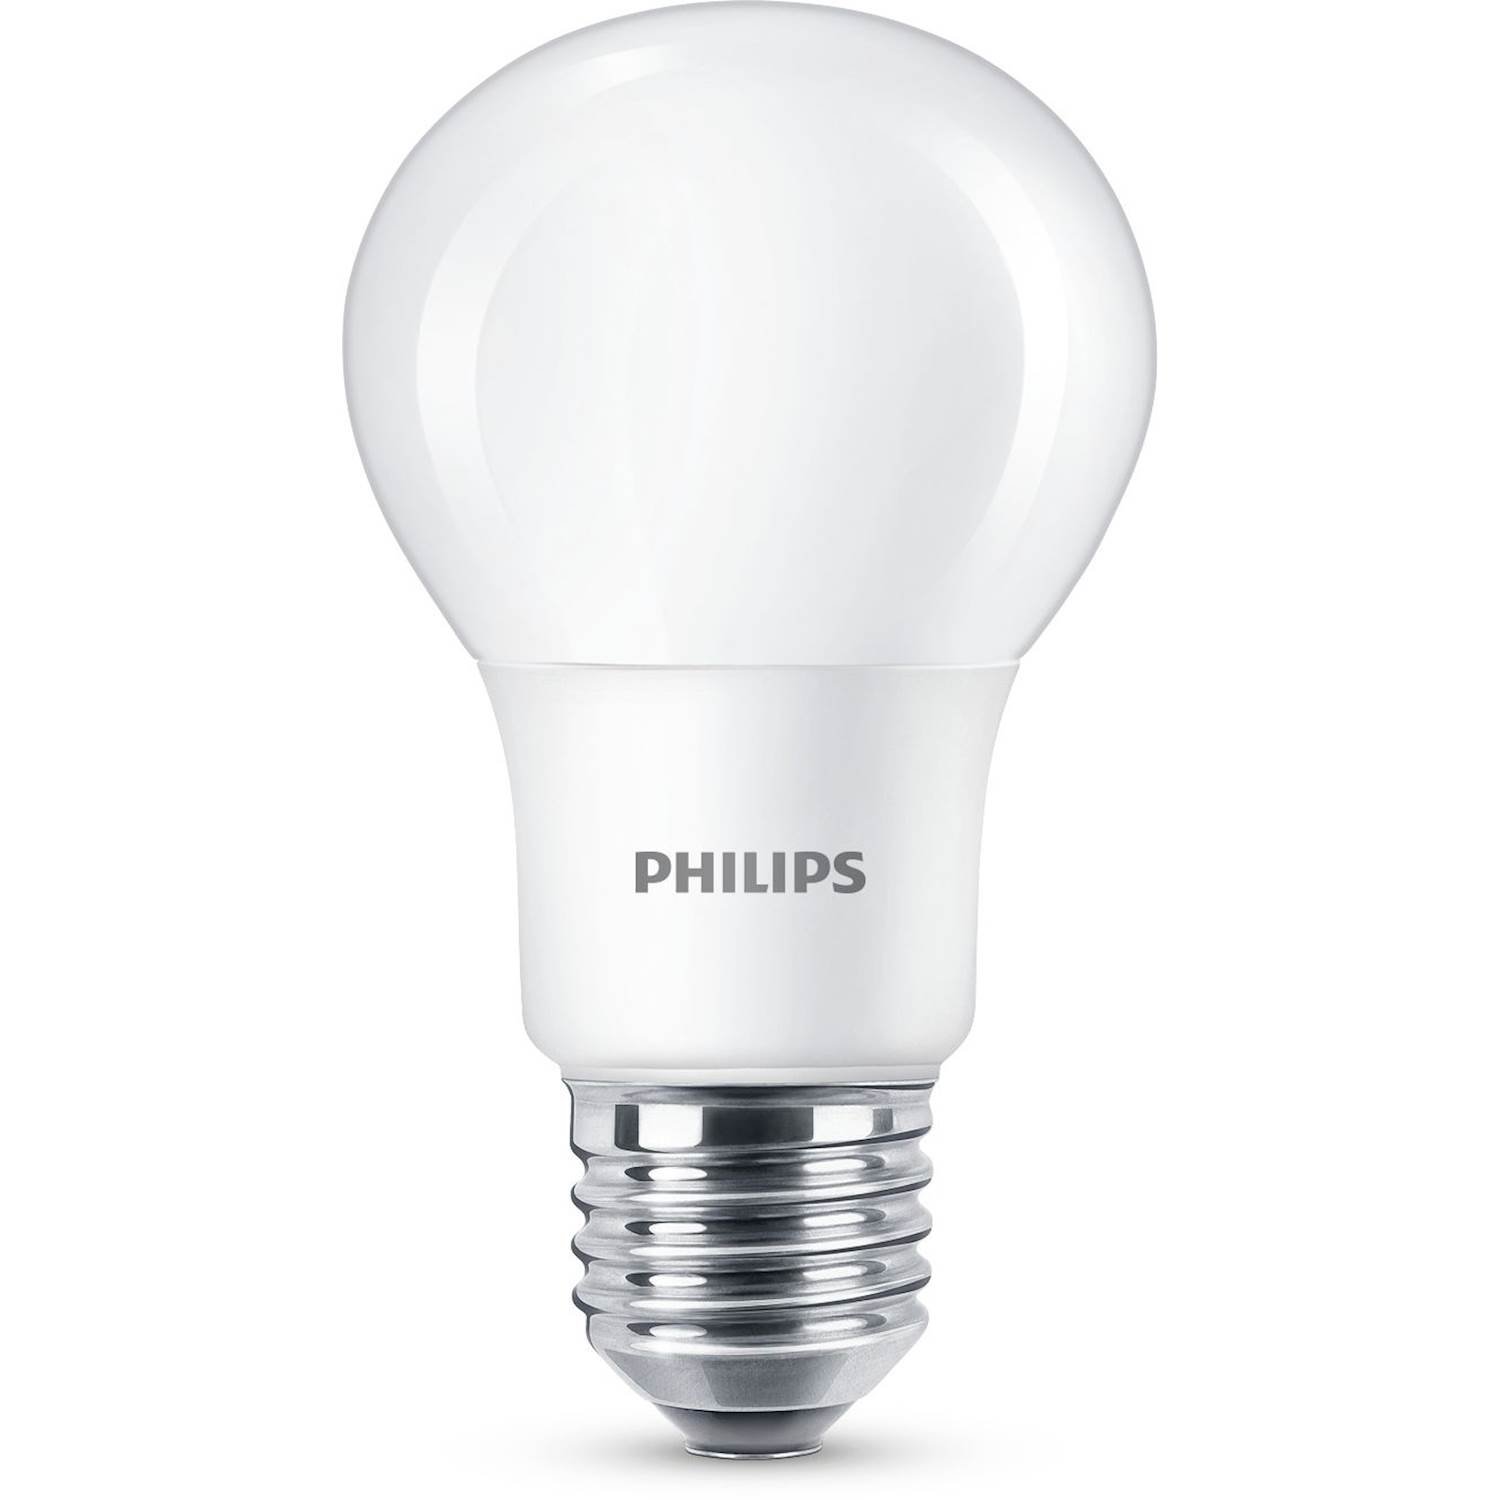 Philips LED 40w norm e27 nd